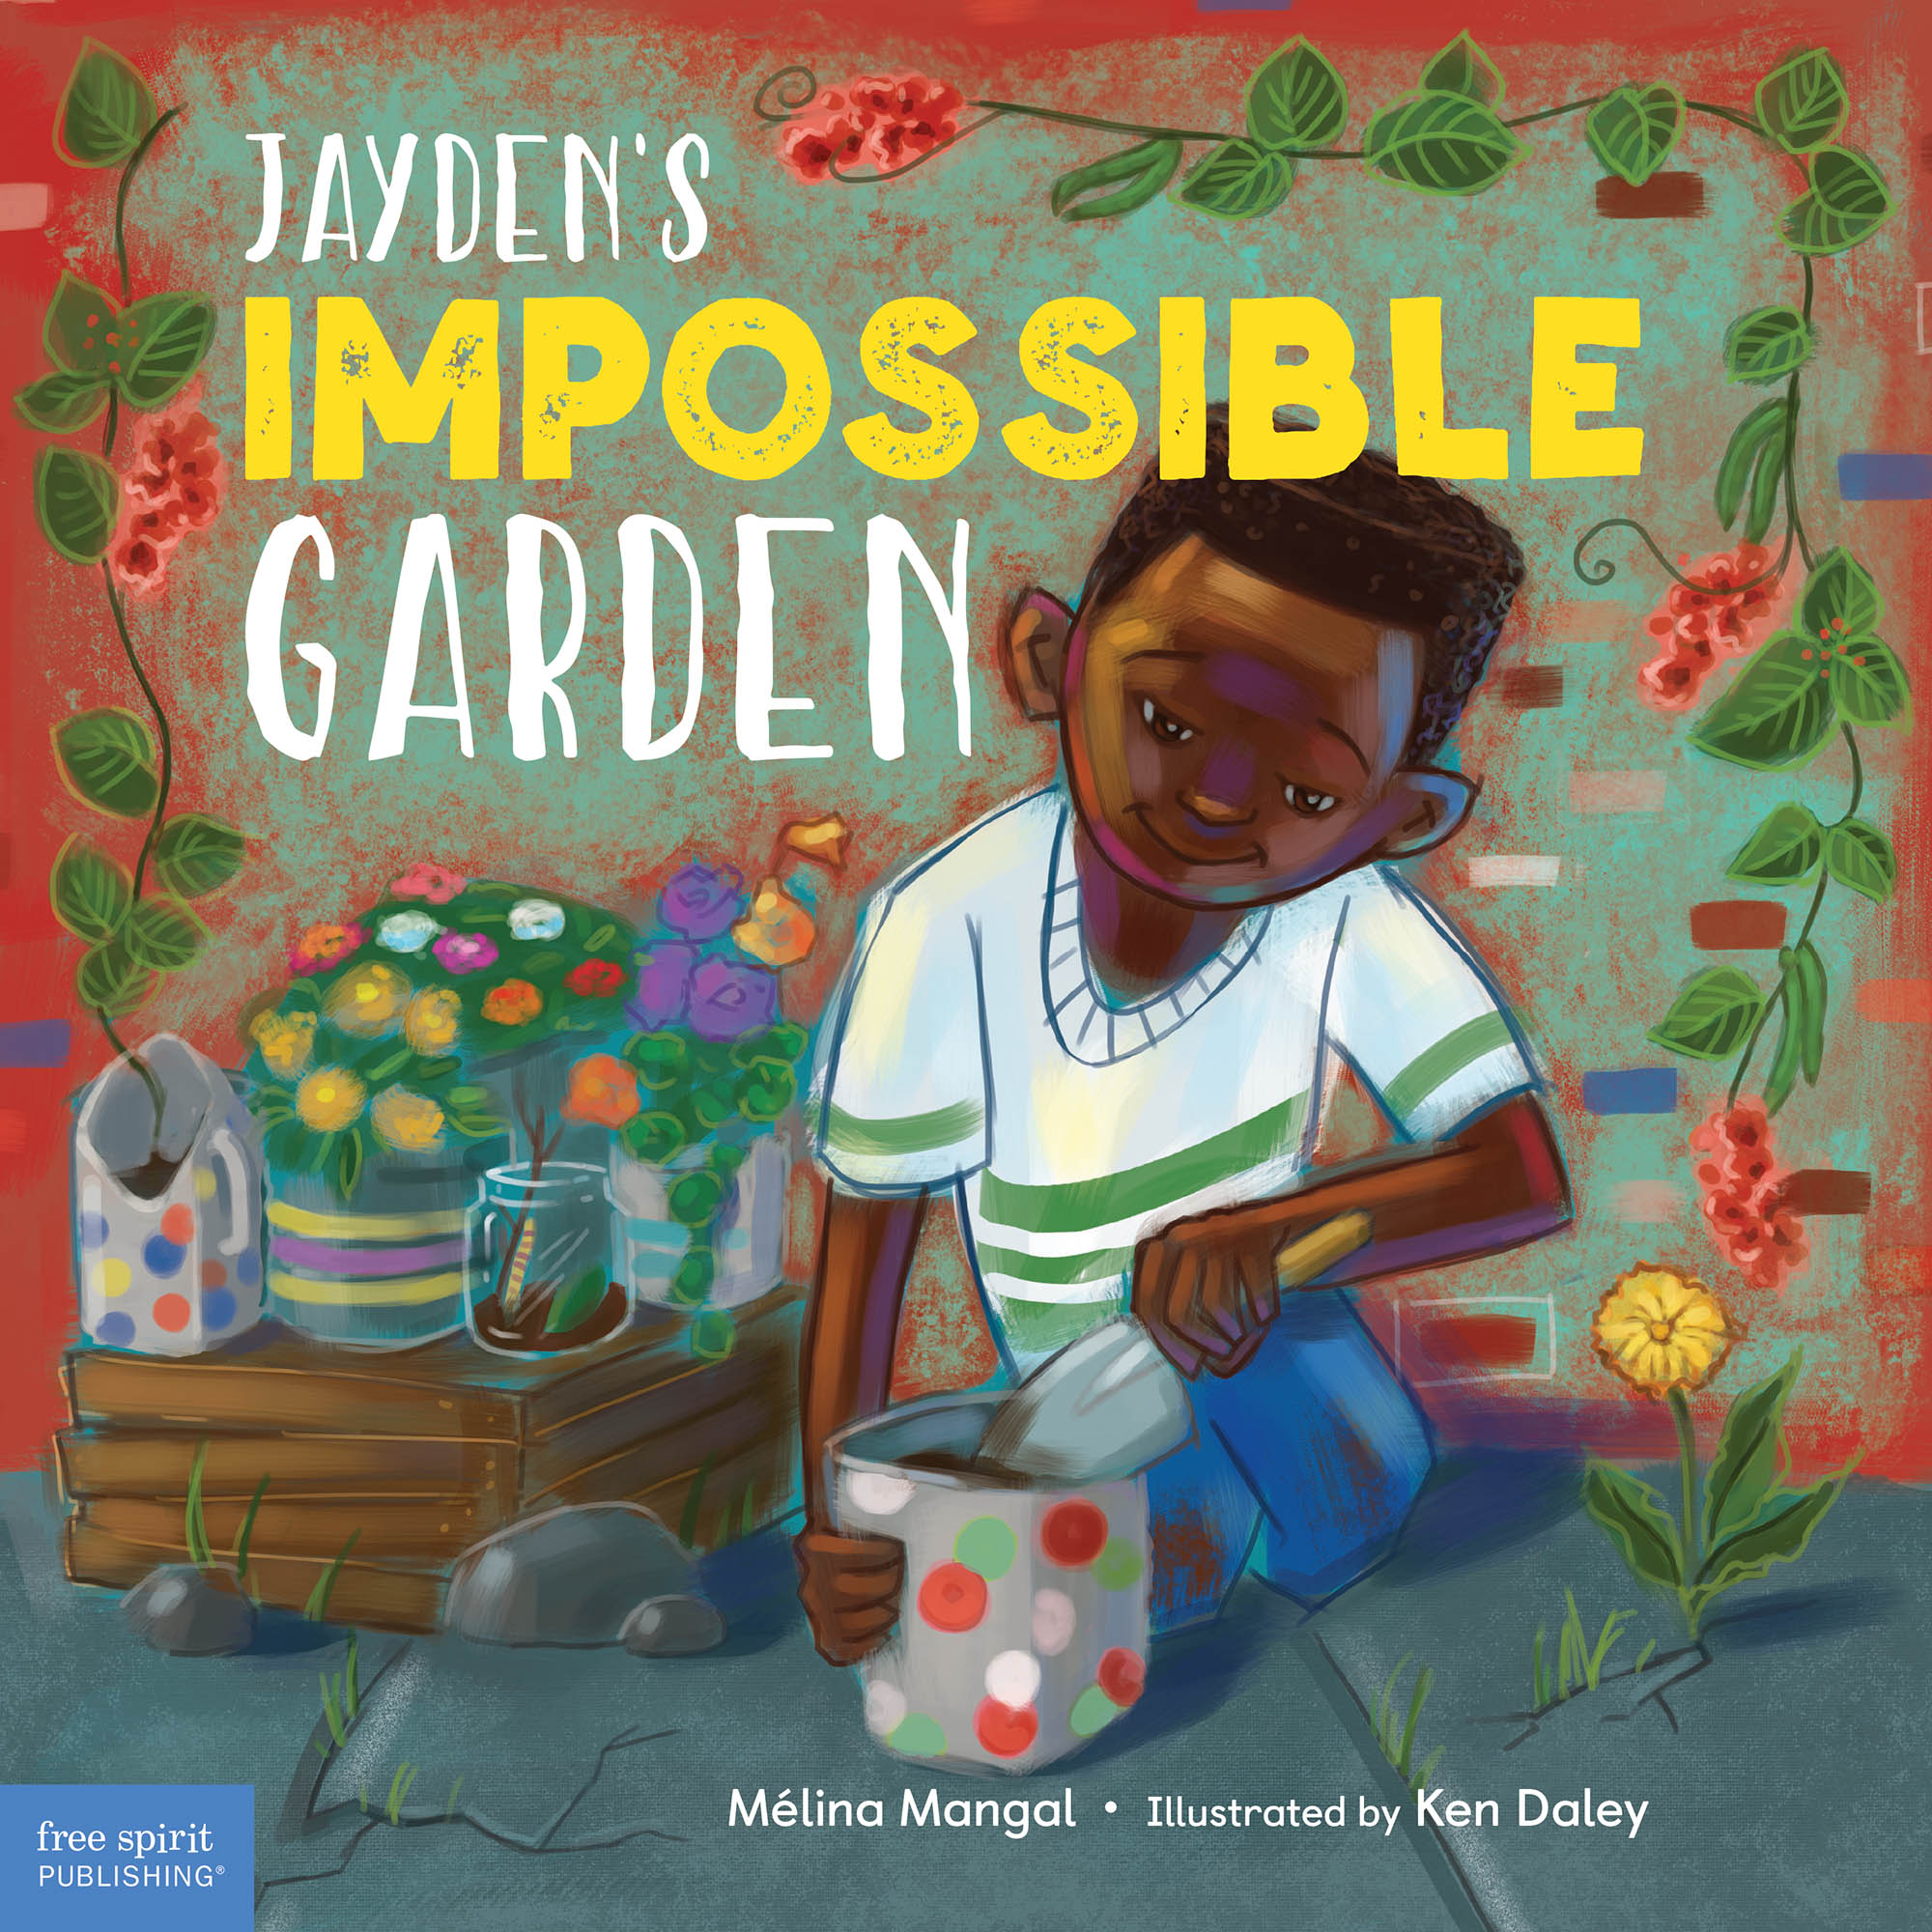 Jayden's Impossible Garden by Mélina Mangal and illustrated by Ken Daley